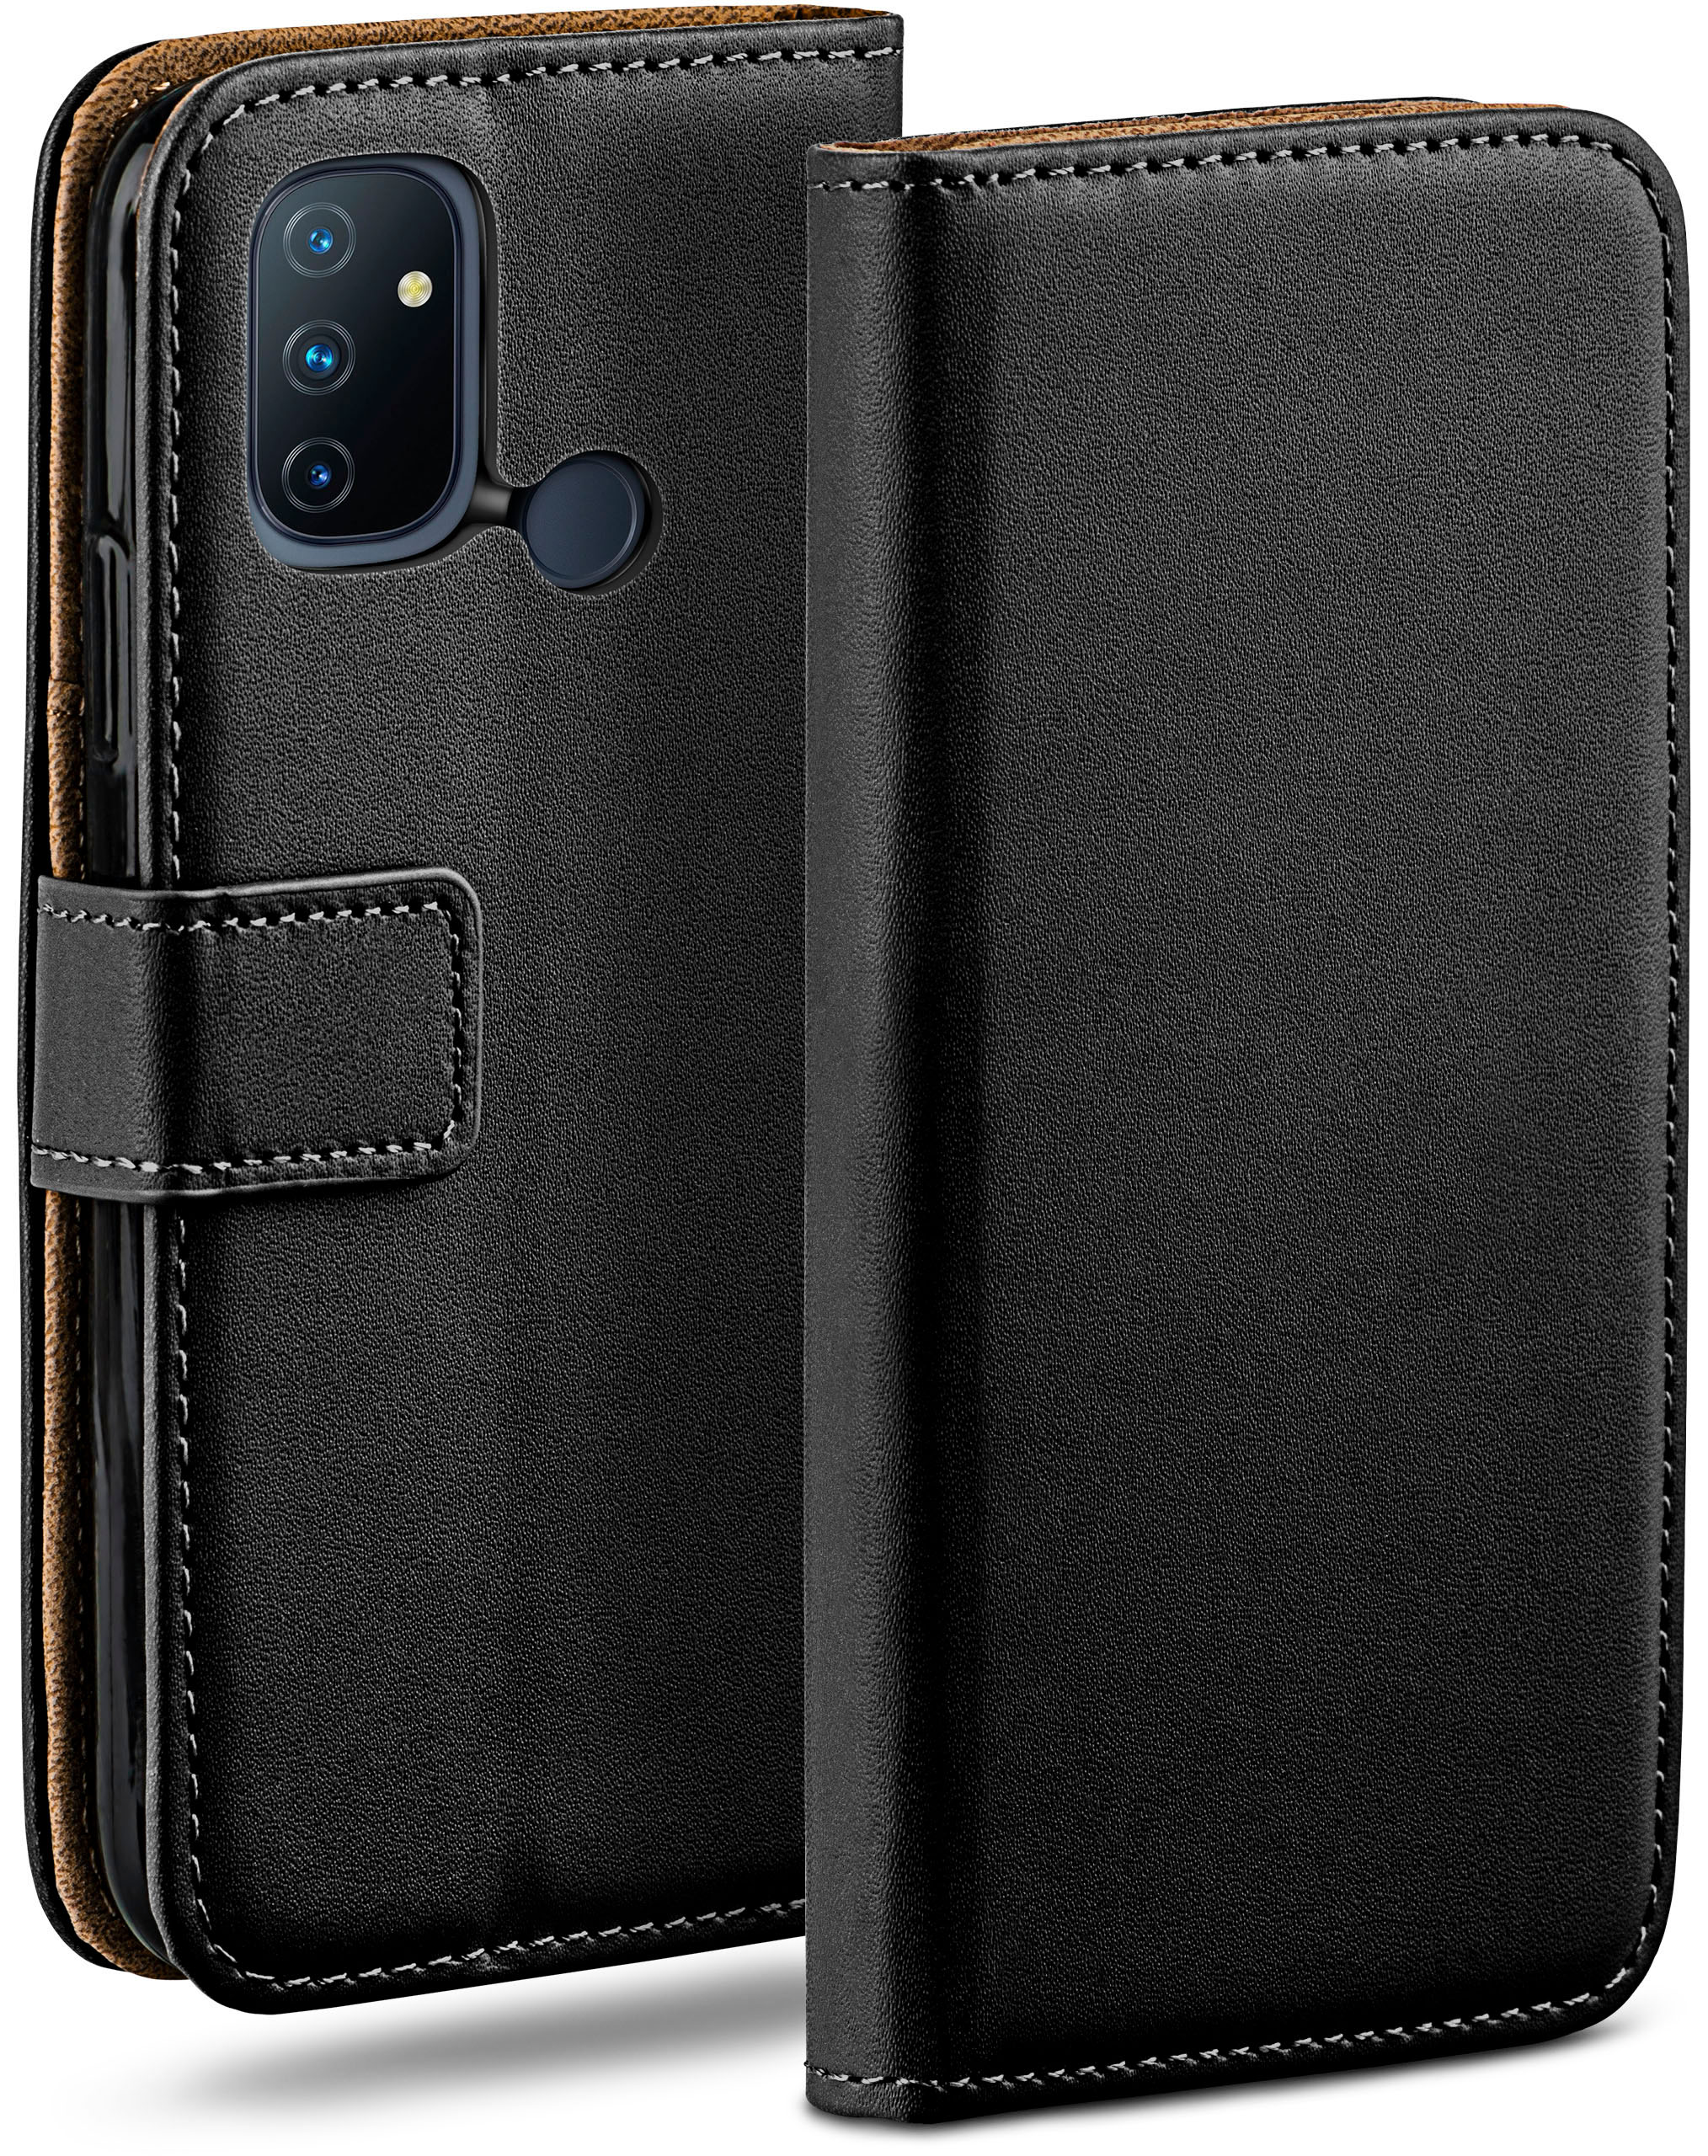 MOEX Book N100, Nord OnePlus, Deep-Black Bookcover, Case